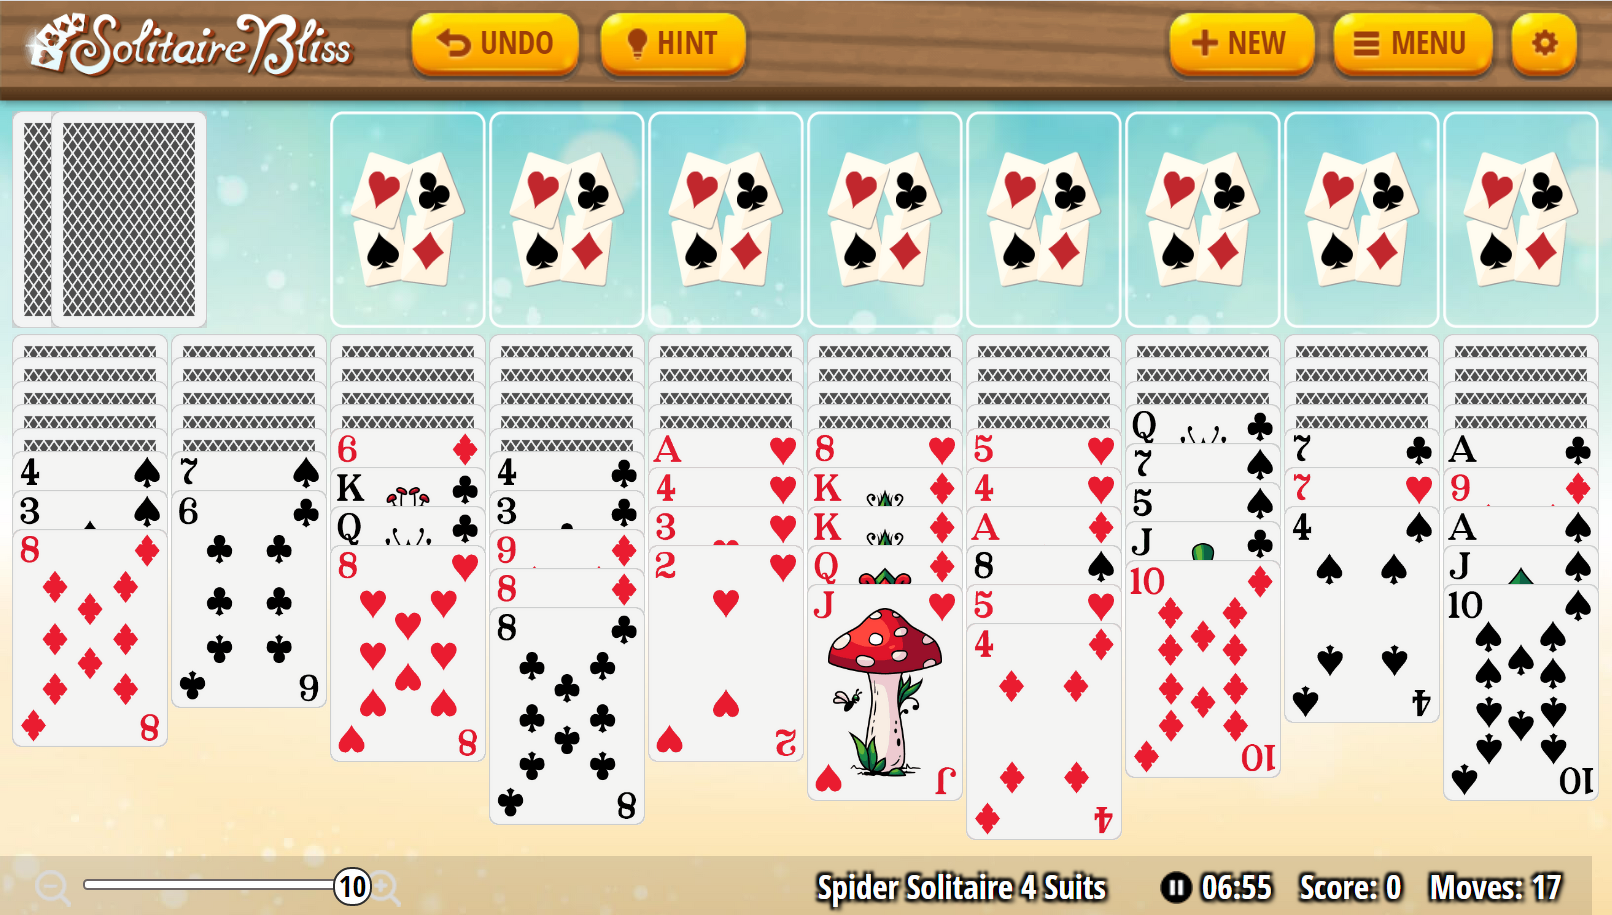 Free Spider Solitaire (1 Suit, 2 Suits & 4 Suits) & Spider Solitaire Rules